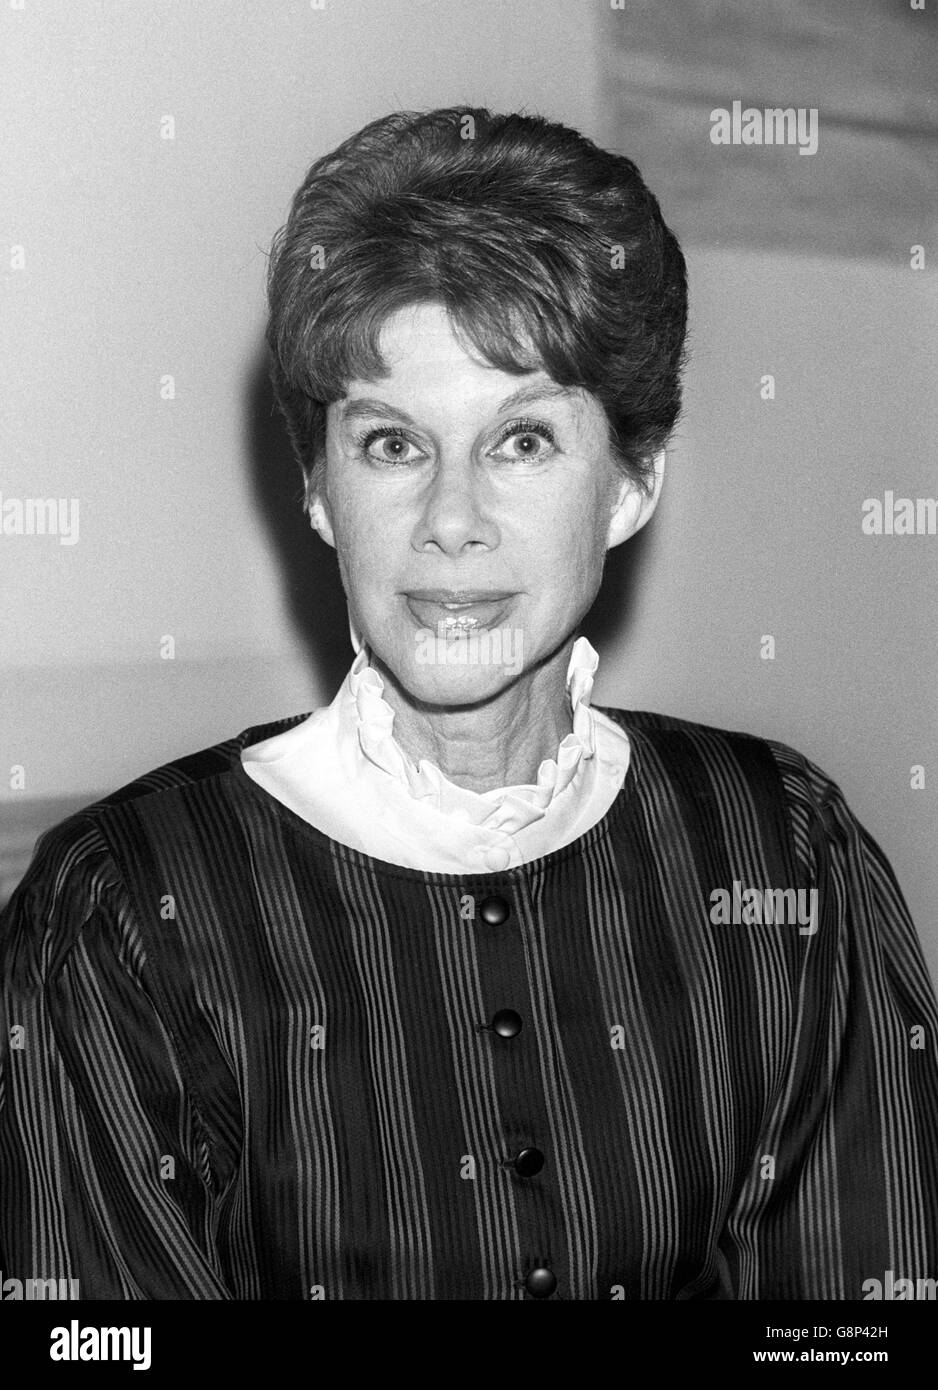 Dr Anita Brookner, winner of Britain's Booker McConnell fiction prize for Hotel du Lac. Stock Photo